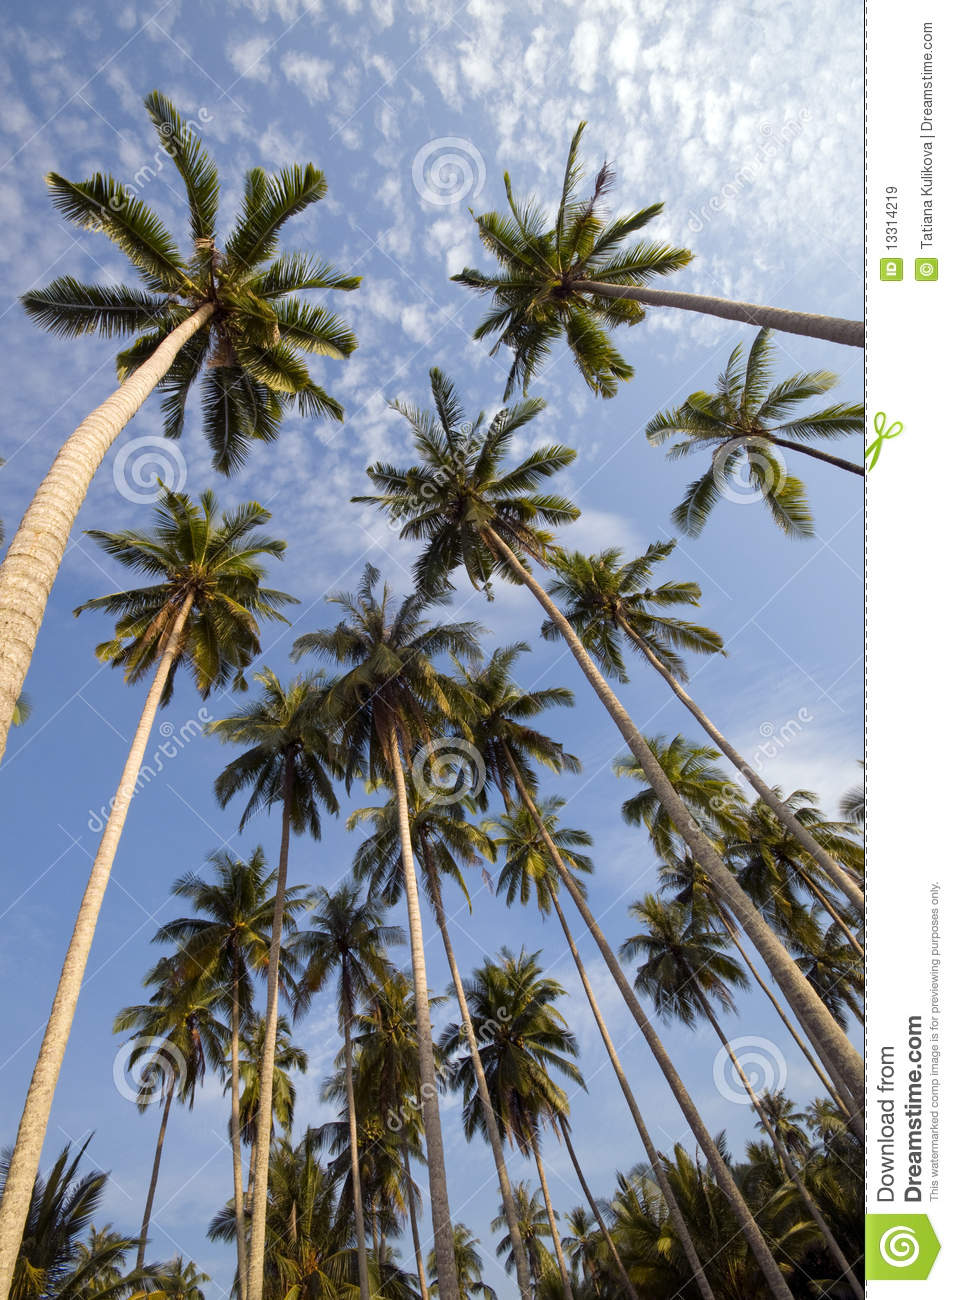 Coconut Palm Trees Against The Blue Sky